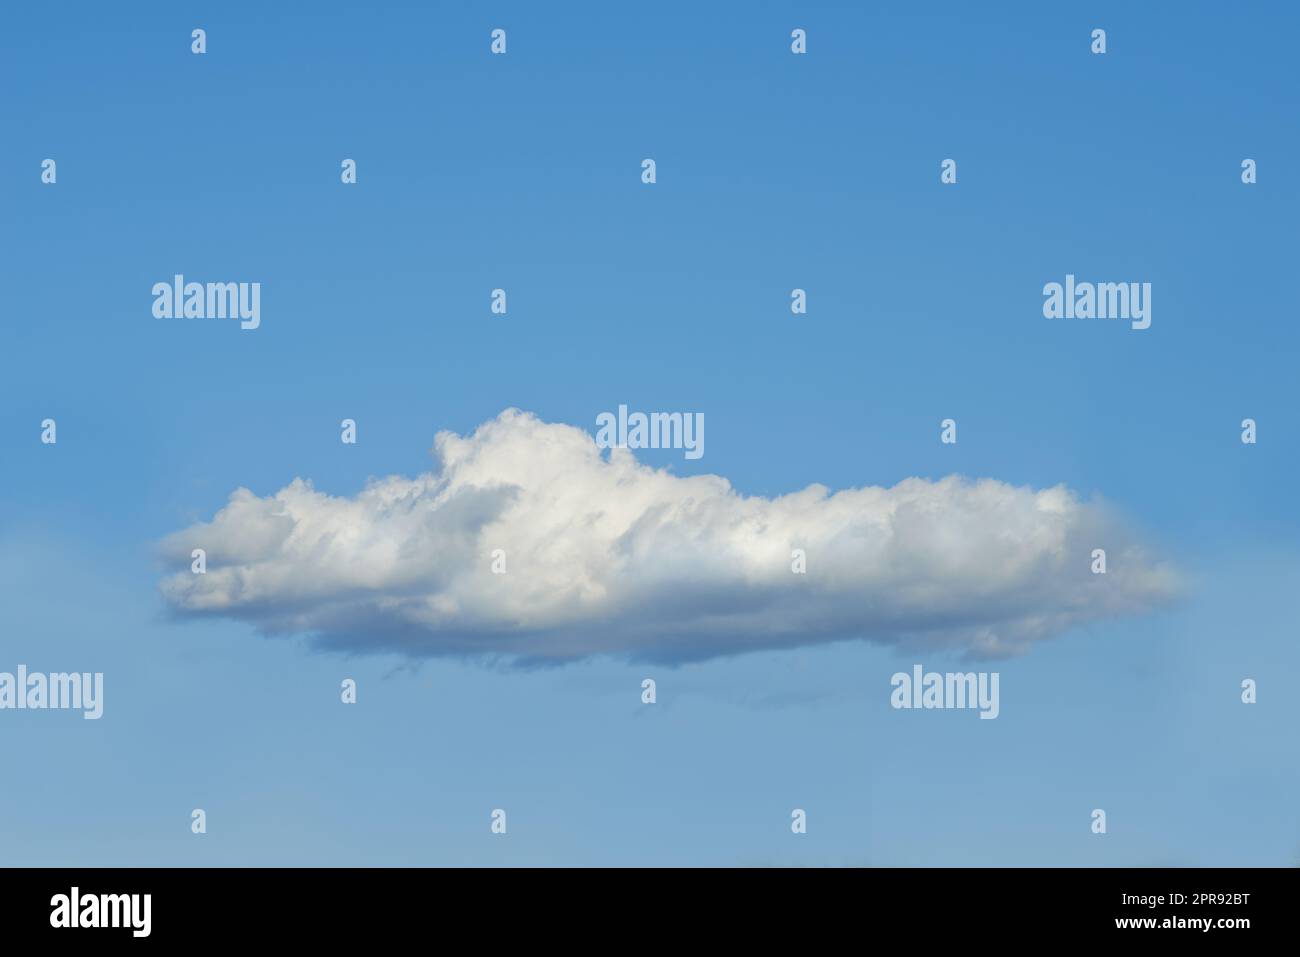 Copy space with a cloud isolated against a clear blue sky on a sunny day outside. One single fluffy and white cloud floating in a peaceful landscape wallpaper and quiet scene for nature background Stock Photo